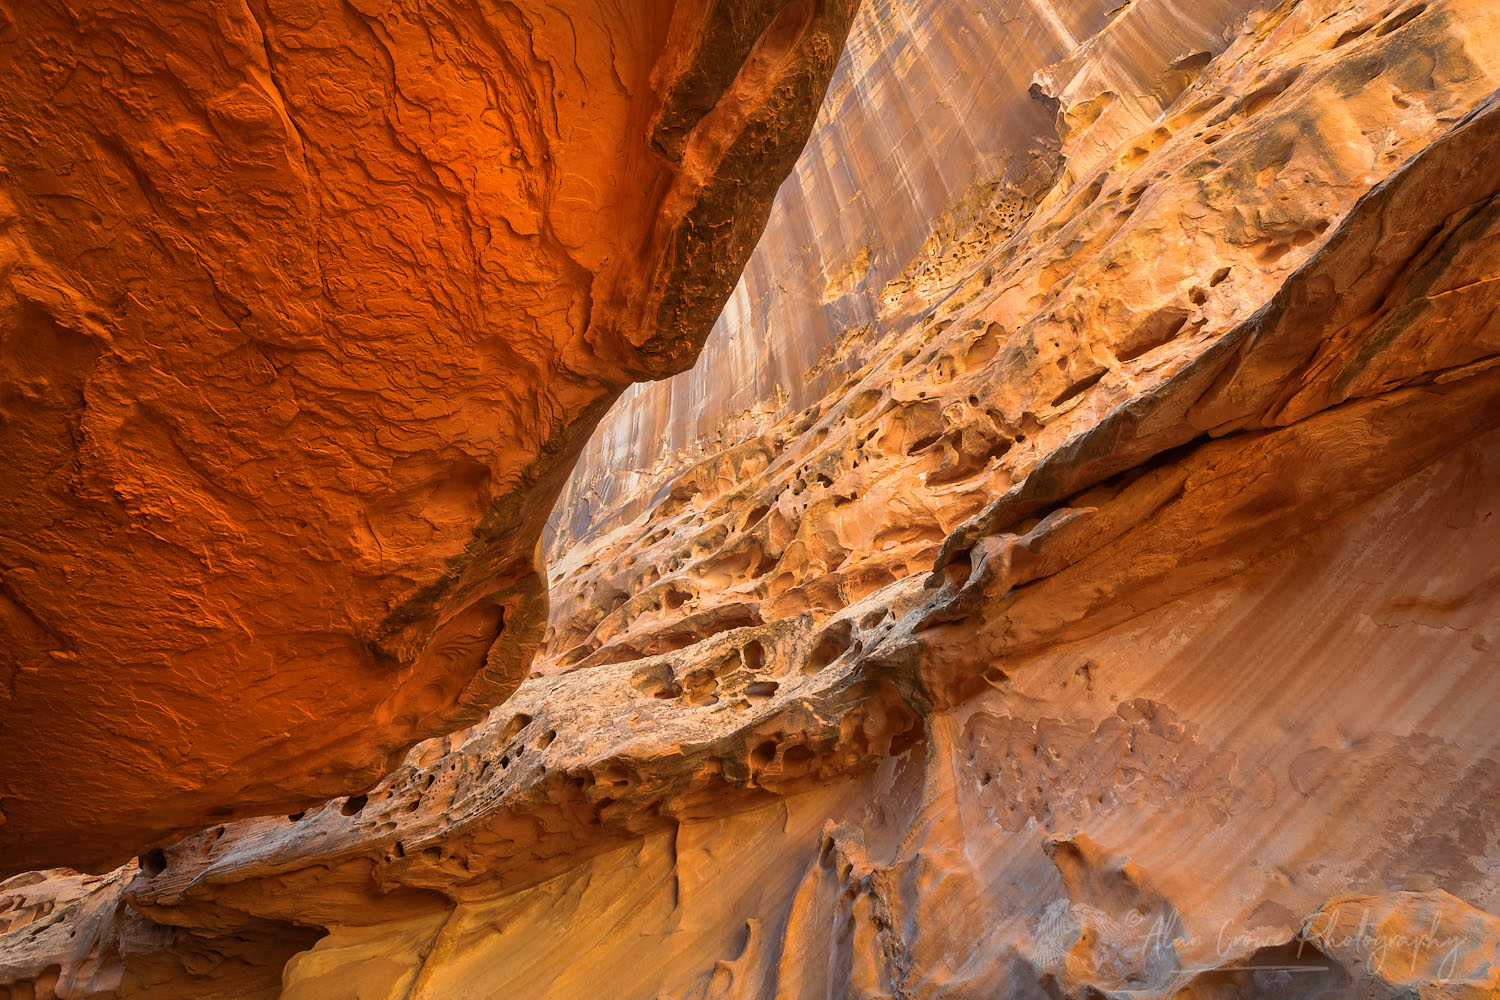 Eroded sandstone walls and overhangs in the"subway" slot portion of Crack Canyon San Rafael Reef Utah #75122